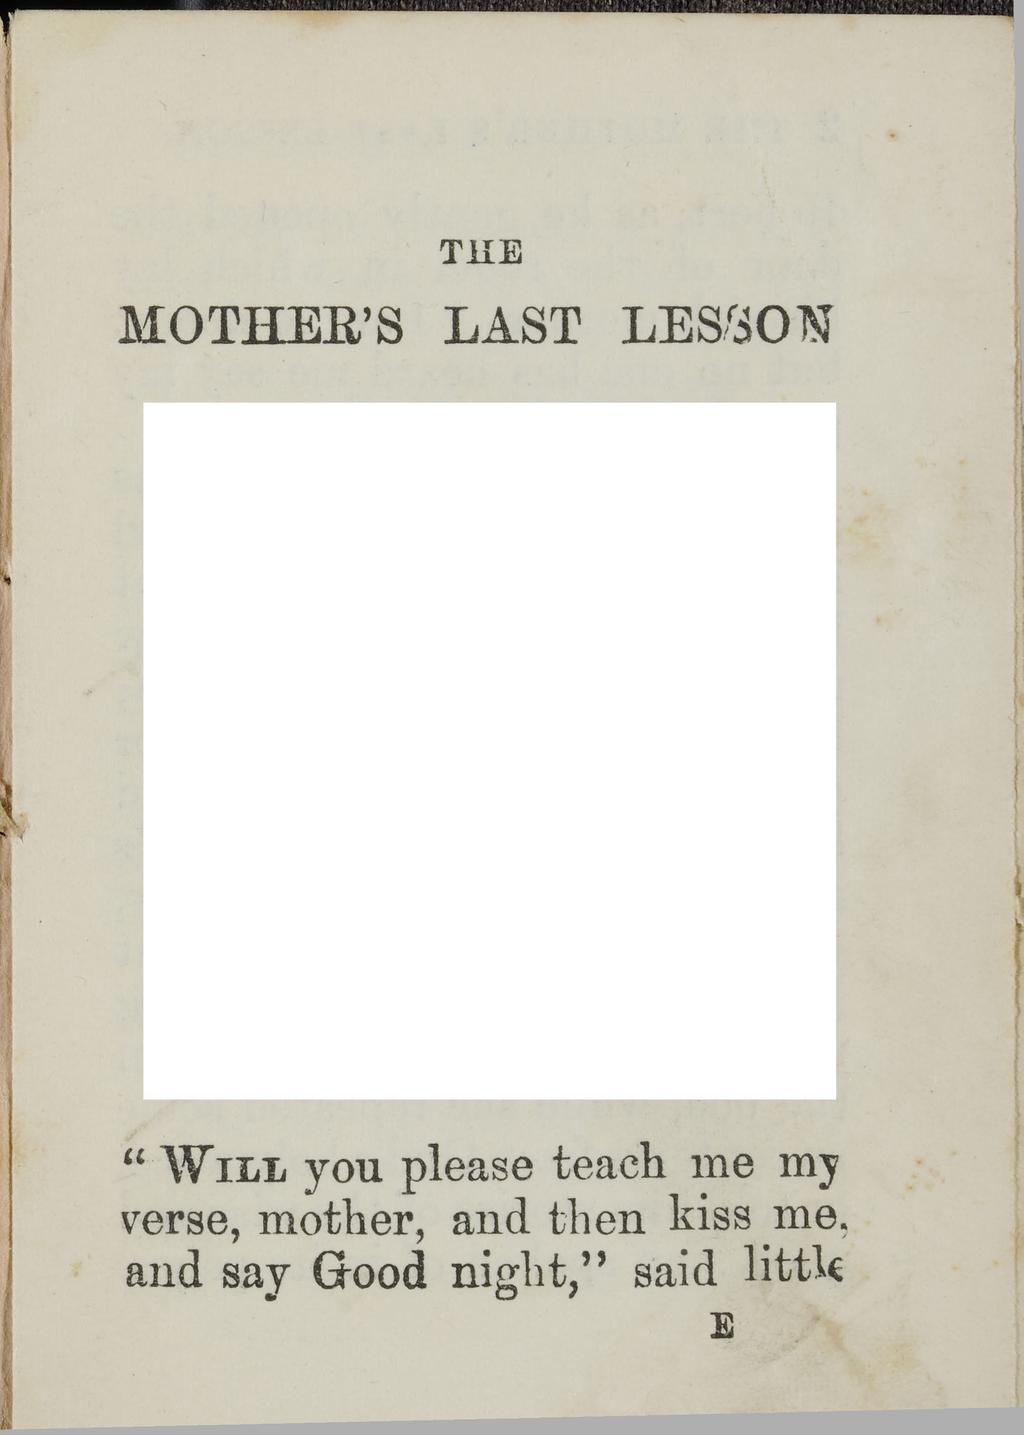 THE MOTHER'S LAST LESSON WILL